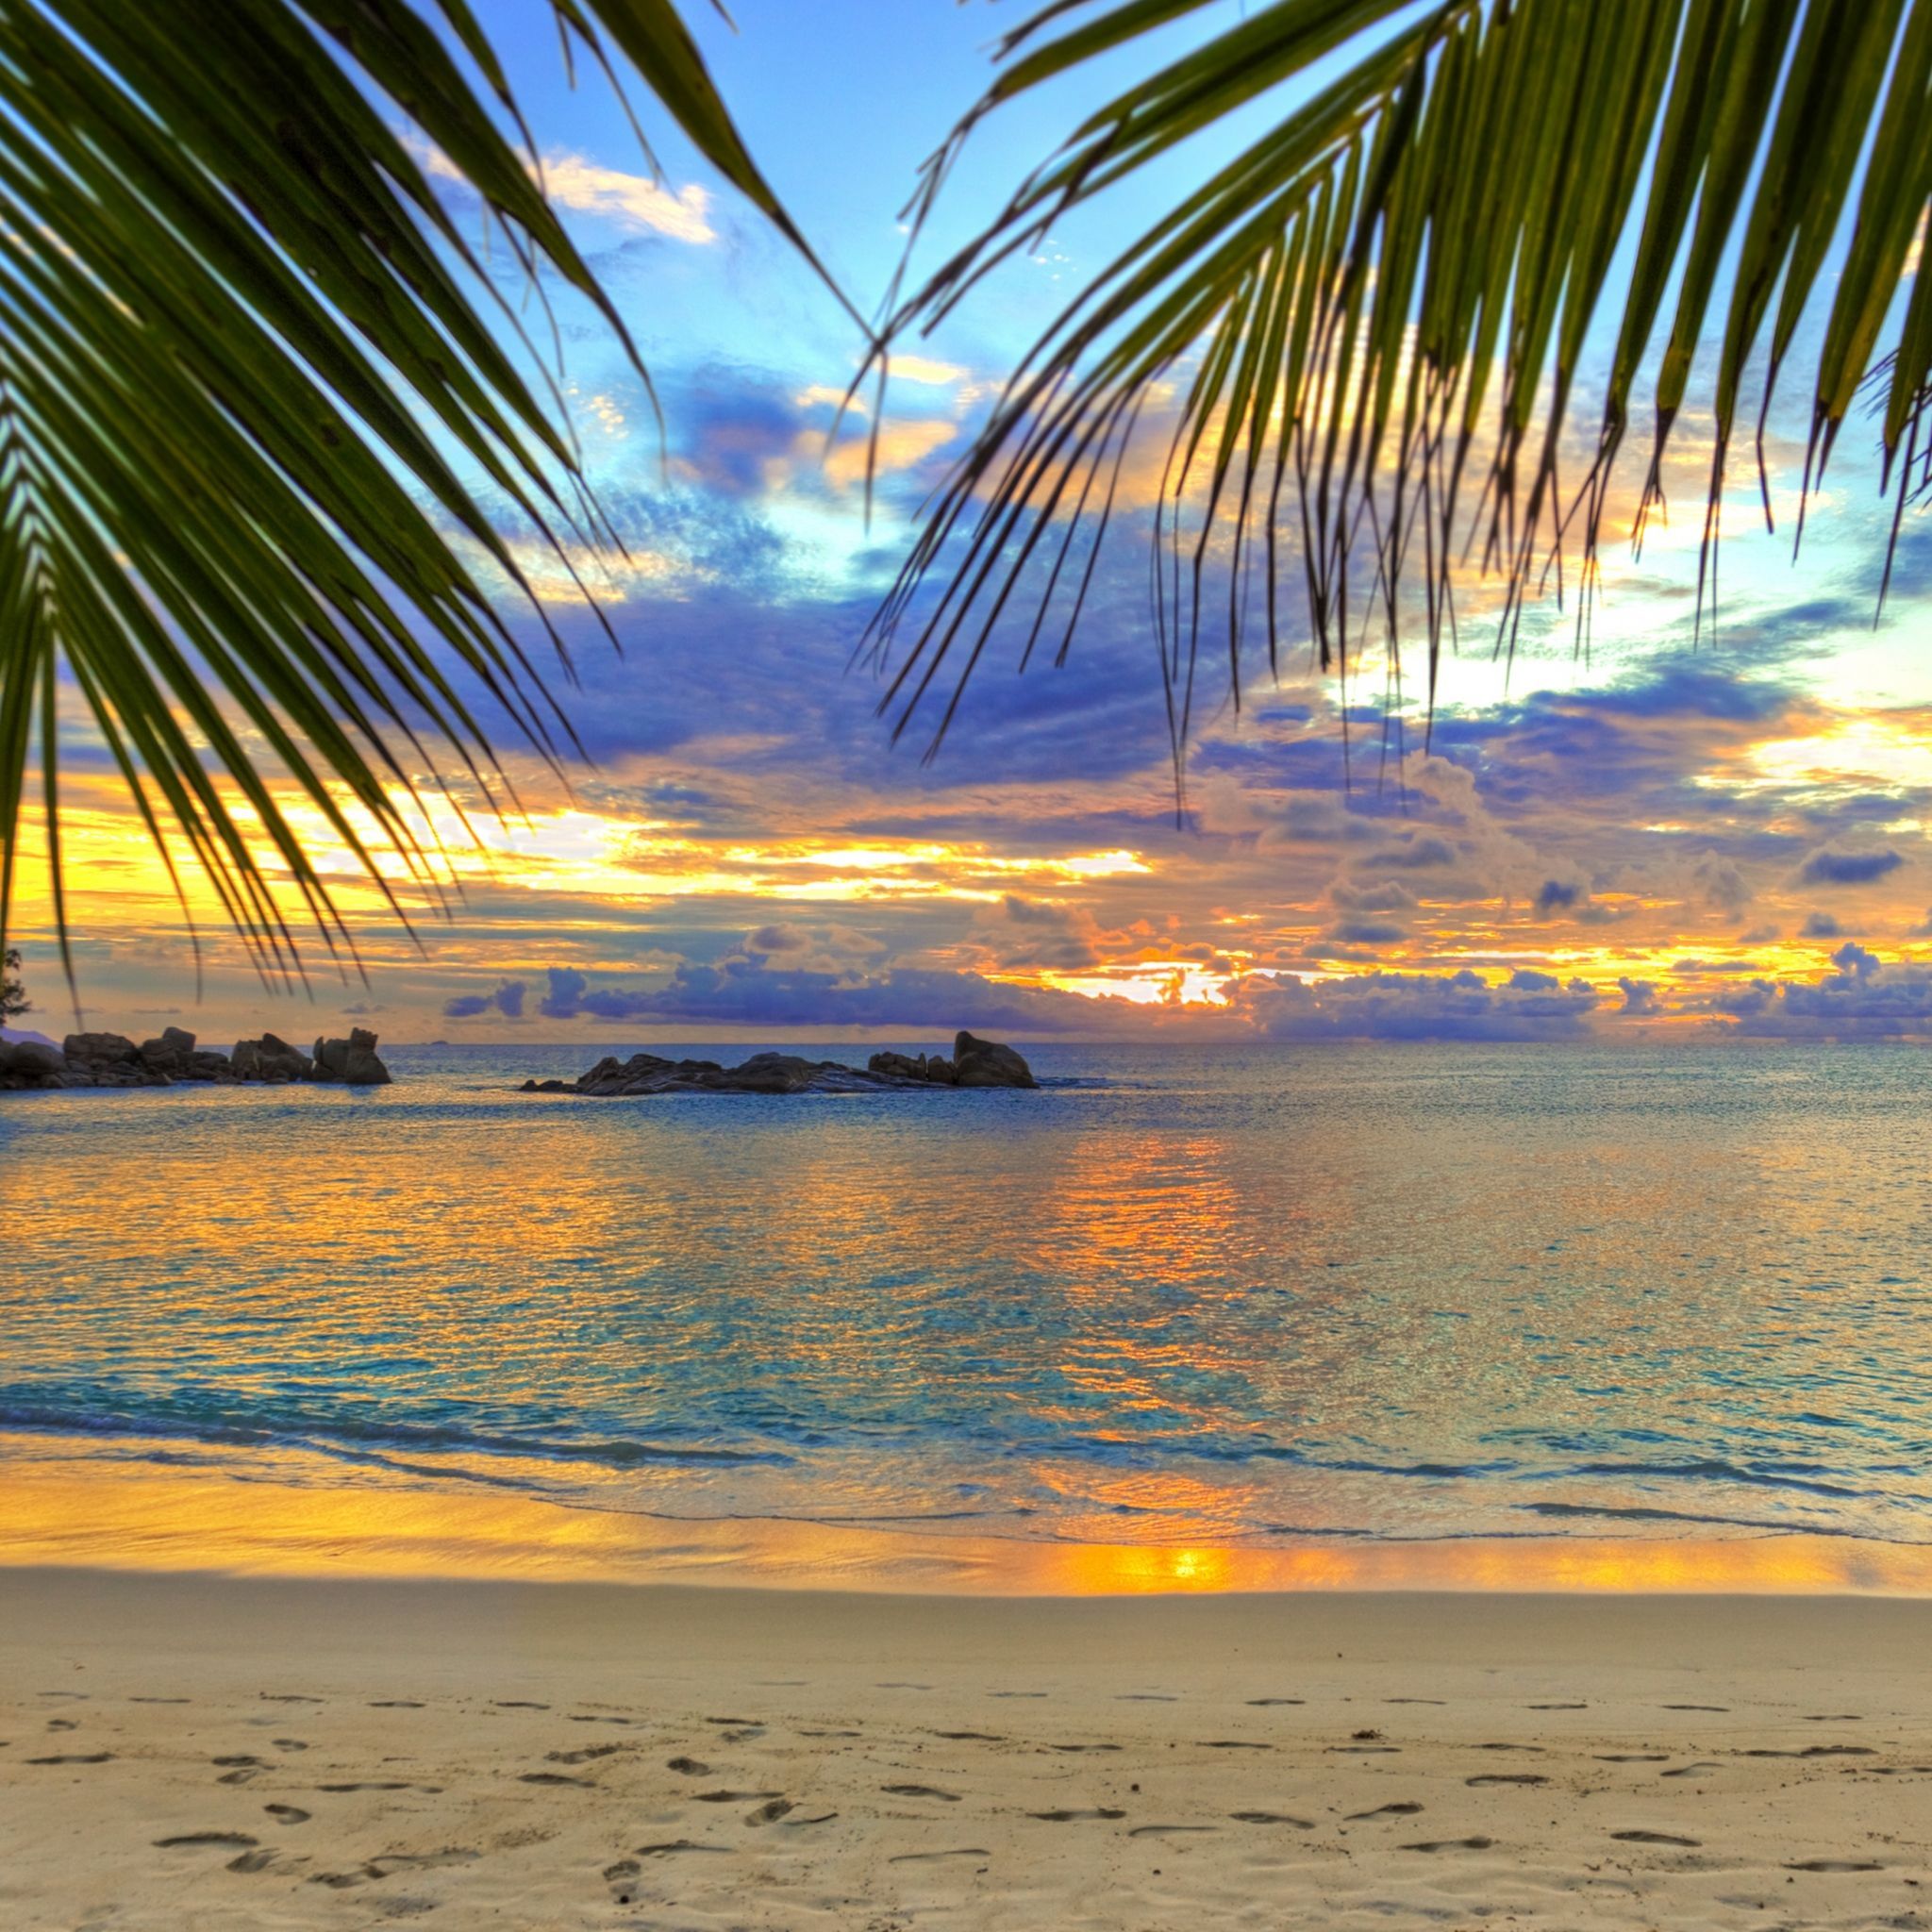 Best Sunrise Beach Wallpaper Background image on All About Beach